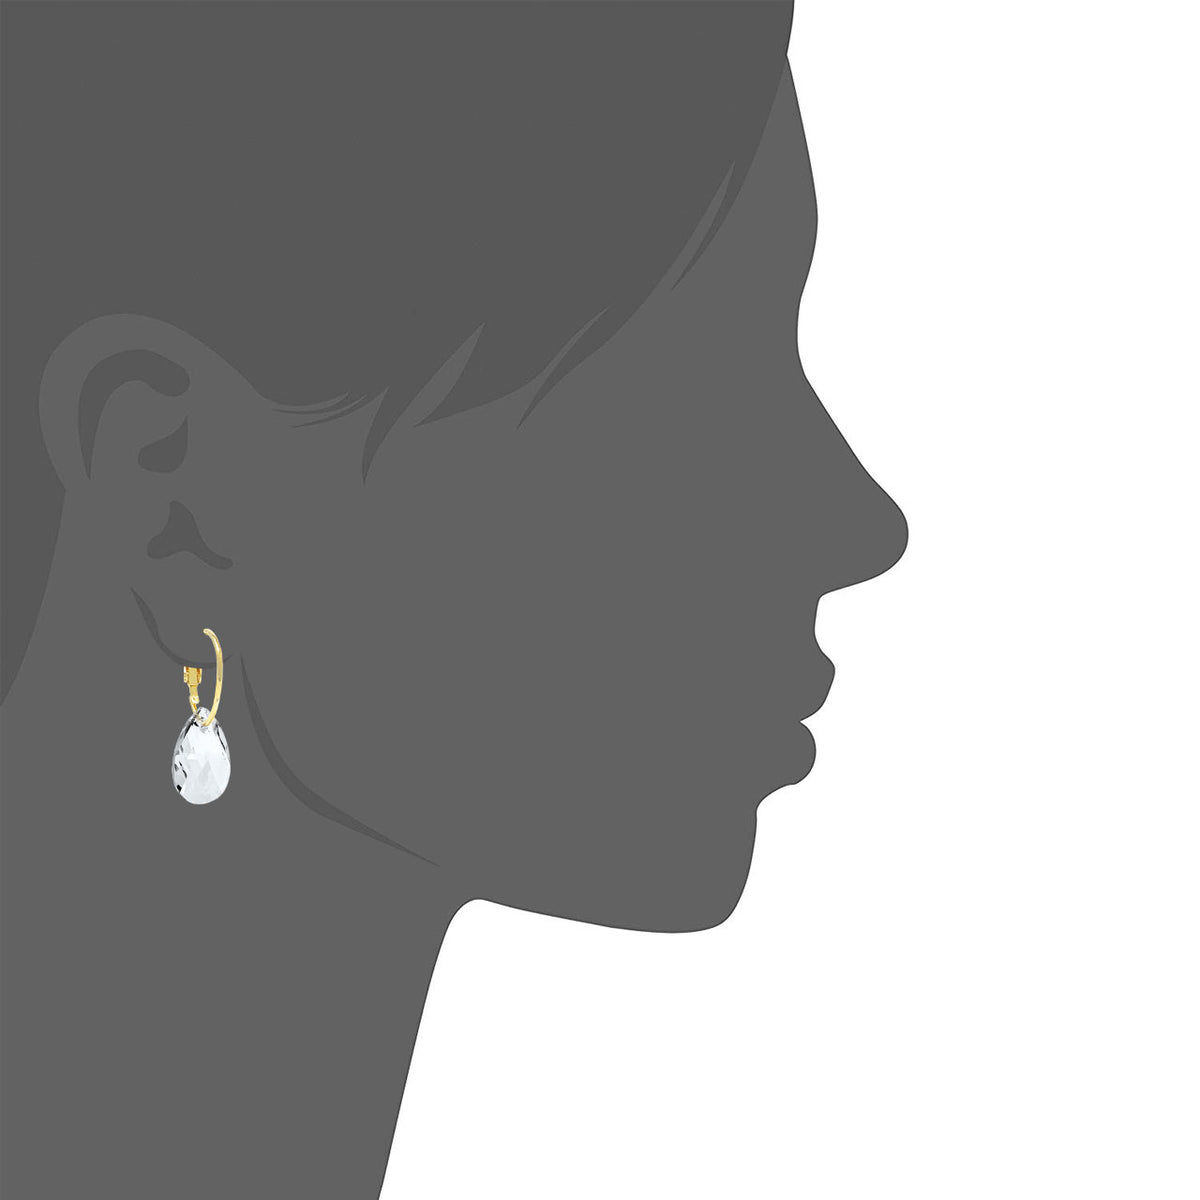 Aurora Small Drop Earrings with White Clear Pear Crystals from Swarovski Gold Plated - Ed Heart